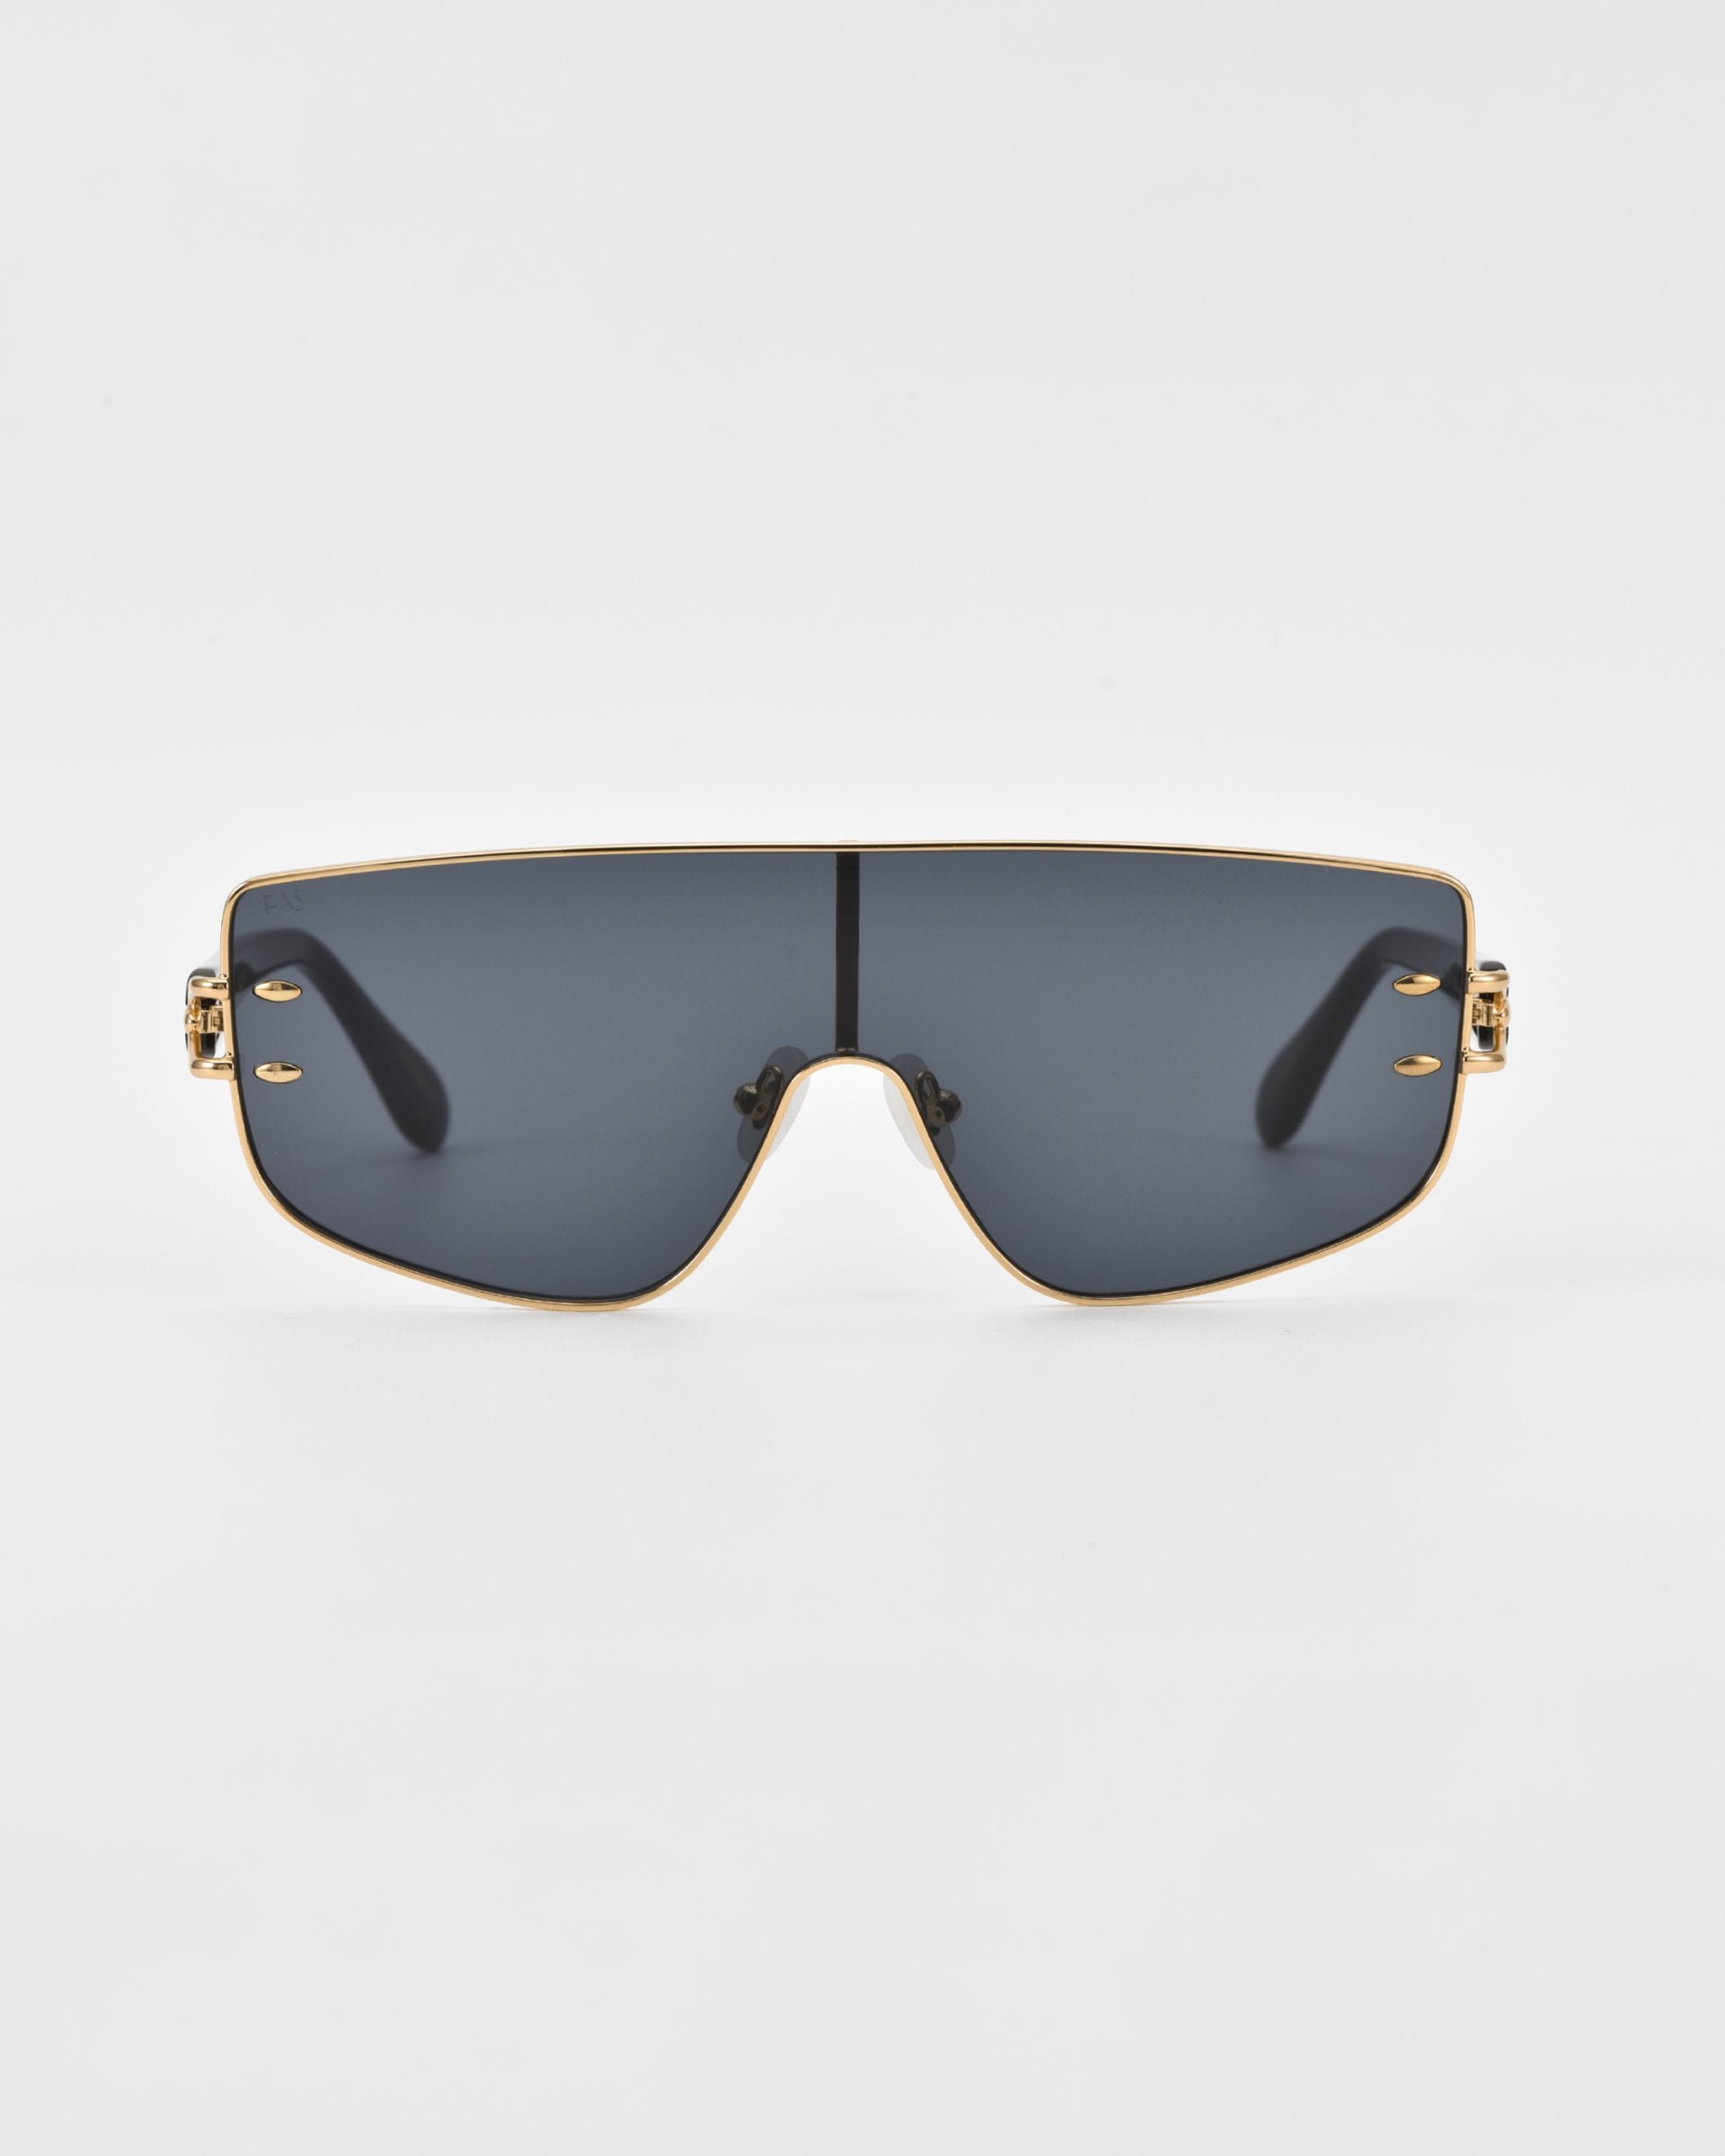 These For Art's Sake® Flare sunglasses feature oversized, dark-tinted lenses and a thin, gold-colored frame. With a flat-top design and decorative accents on the corners, they exude a futuristic design. The background is plain white.